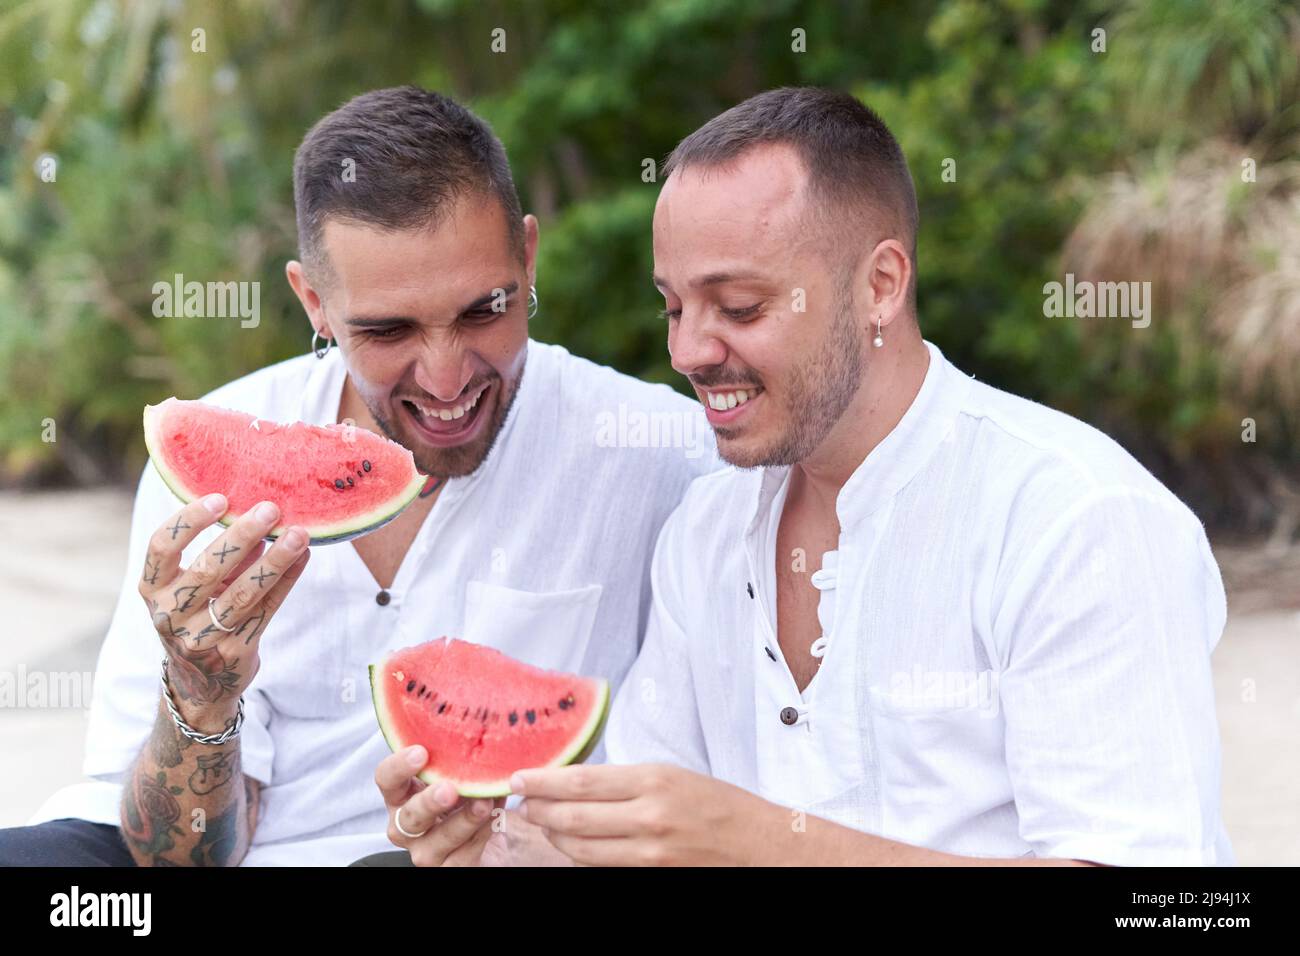 Two gay men sitting on a beach while smiling and holing a piece of watermelon Stock Photo